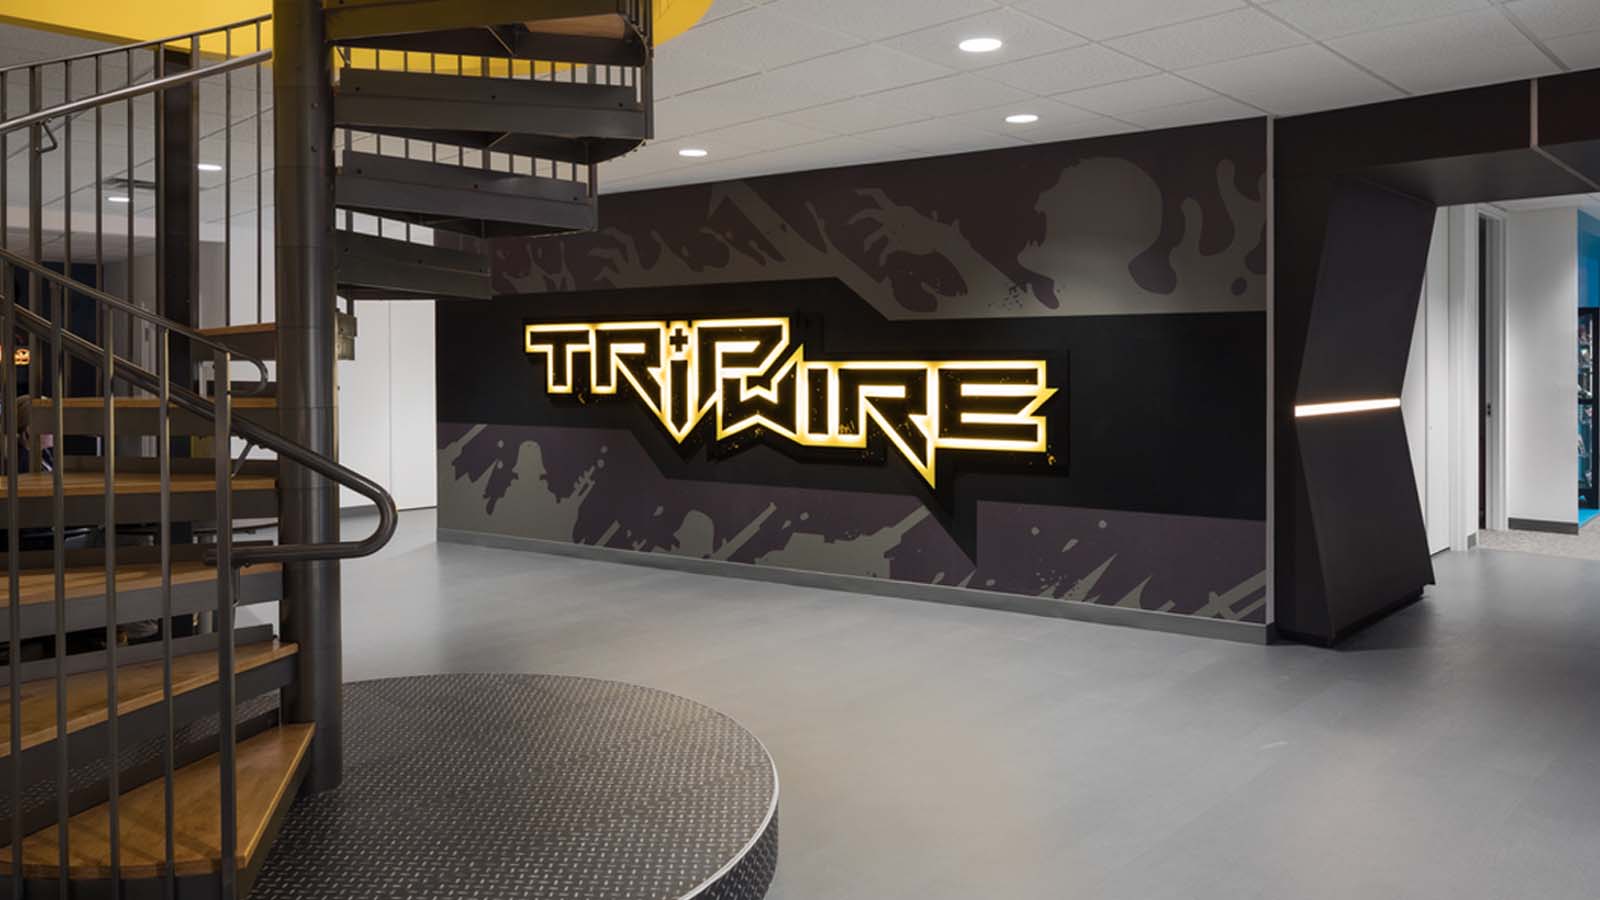 Tripwire Interactive CEO steps down after backlash over controversial tweet